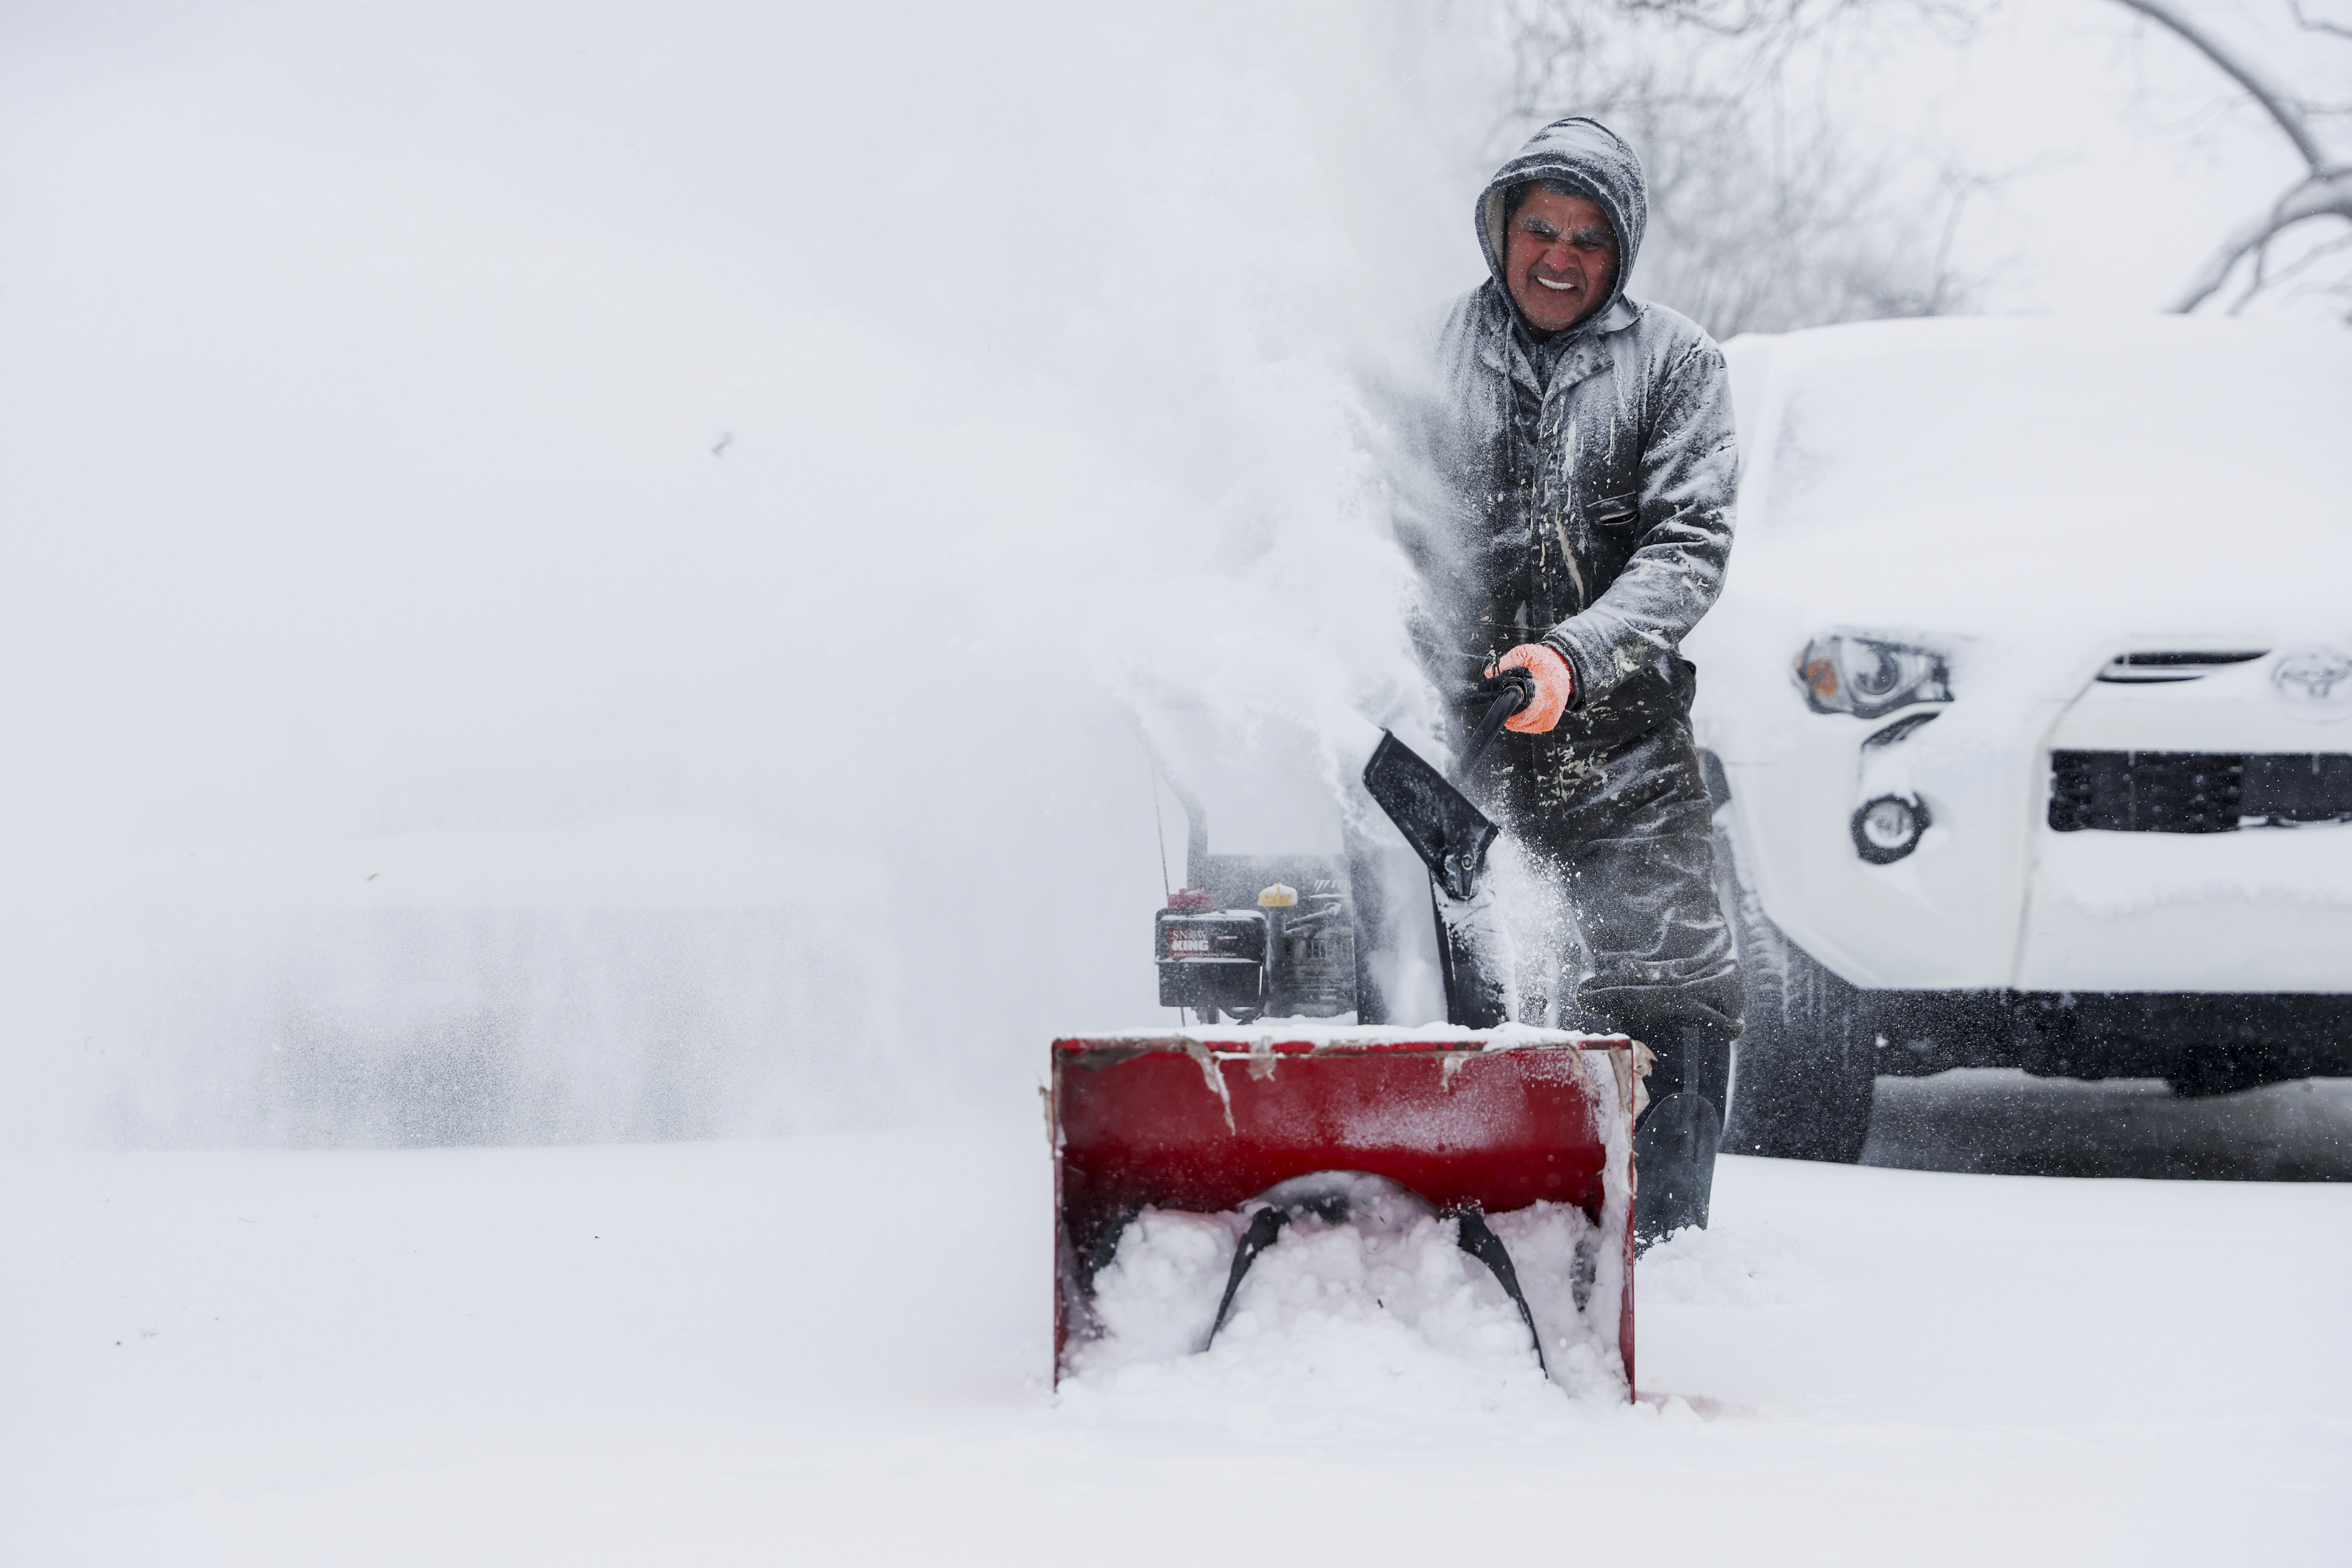 A man uses a blower to clear snow 